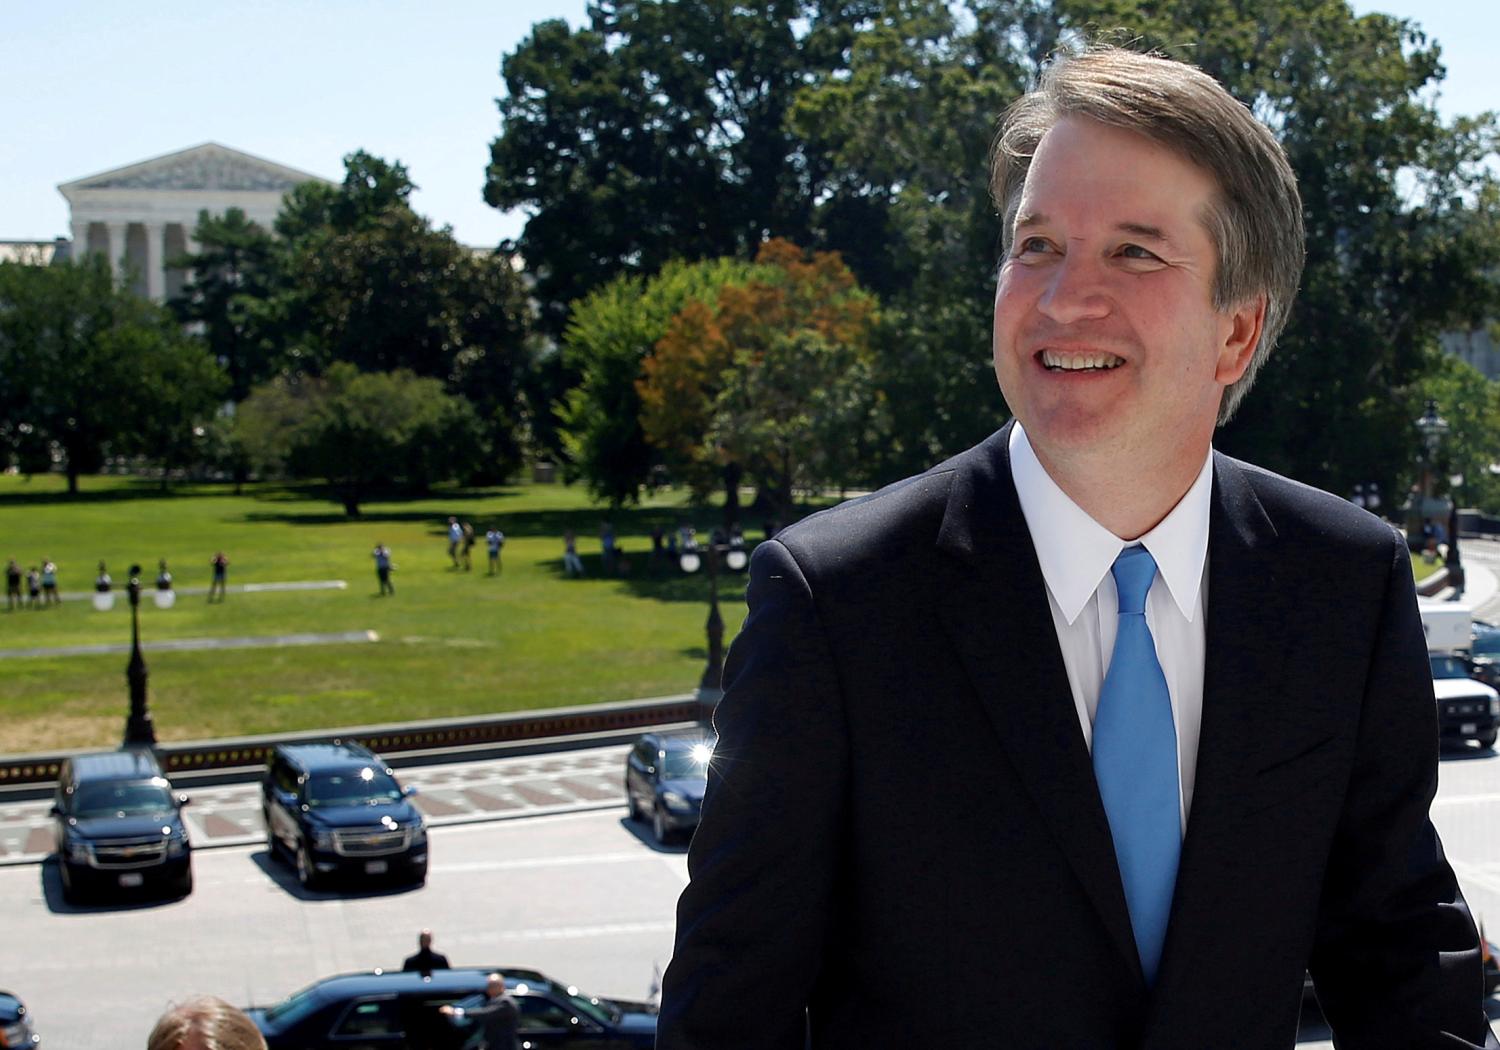 FILE PHOTO:    With the U.S. Supreme Court building in the background, Supreme Court nominee judge Brett Kavanaugh arrives prior to meeting with Senate Majority Leader Mitch McConnell on Capitol Hill in Washington, U.S., July 10, 2018. REUTERS/Joshua Roberts/File Photo - RC193B83C020